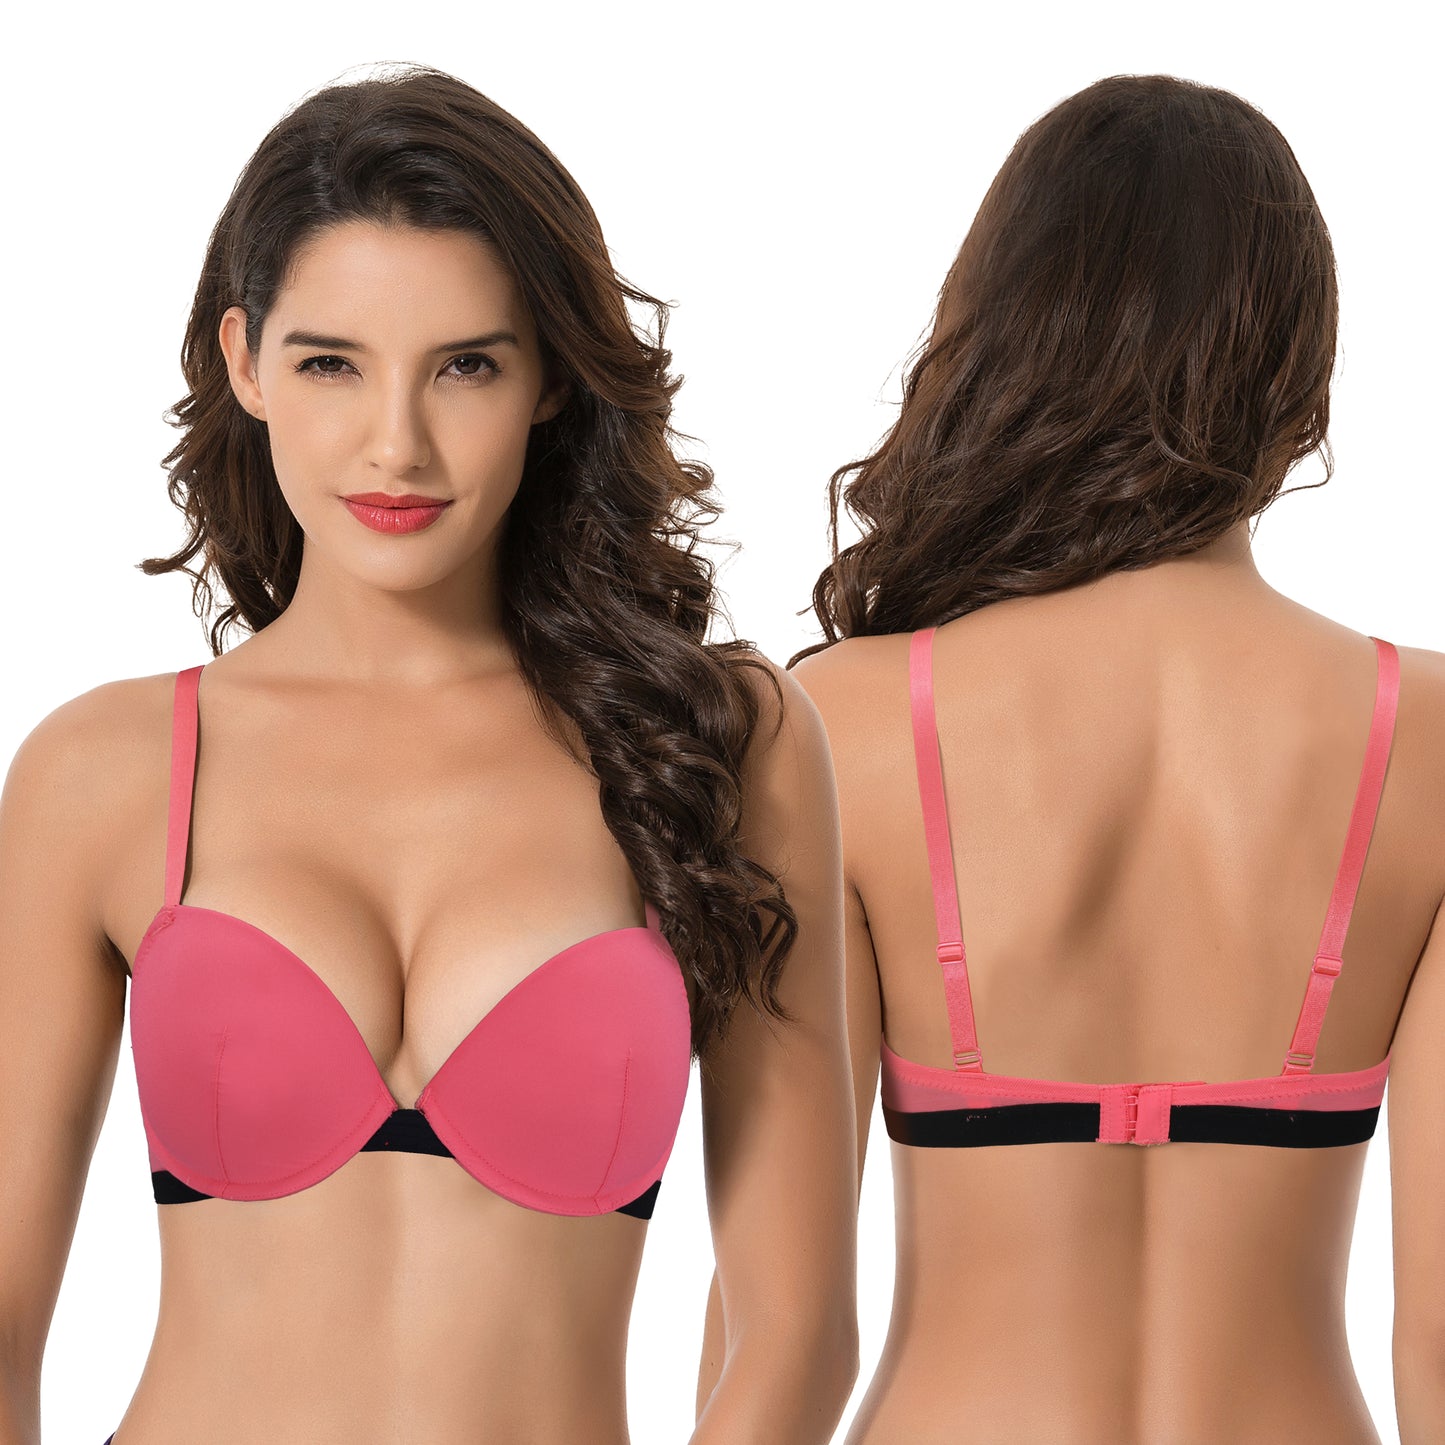 Women's Plus Size Add 1 and a half Cup Push Up Underwire Bras -2PK-Pink Print,Coral